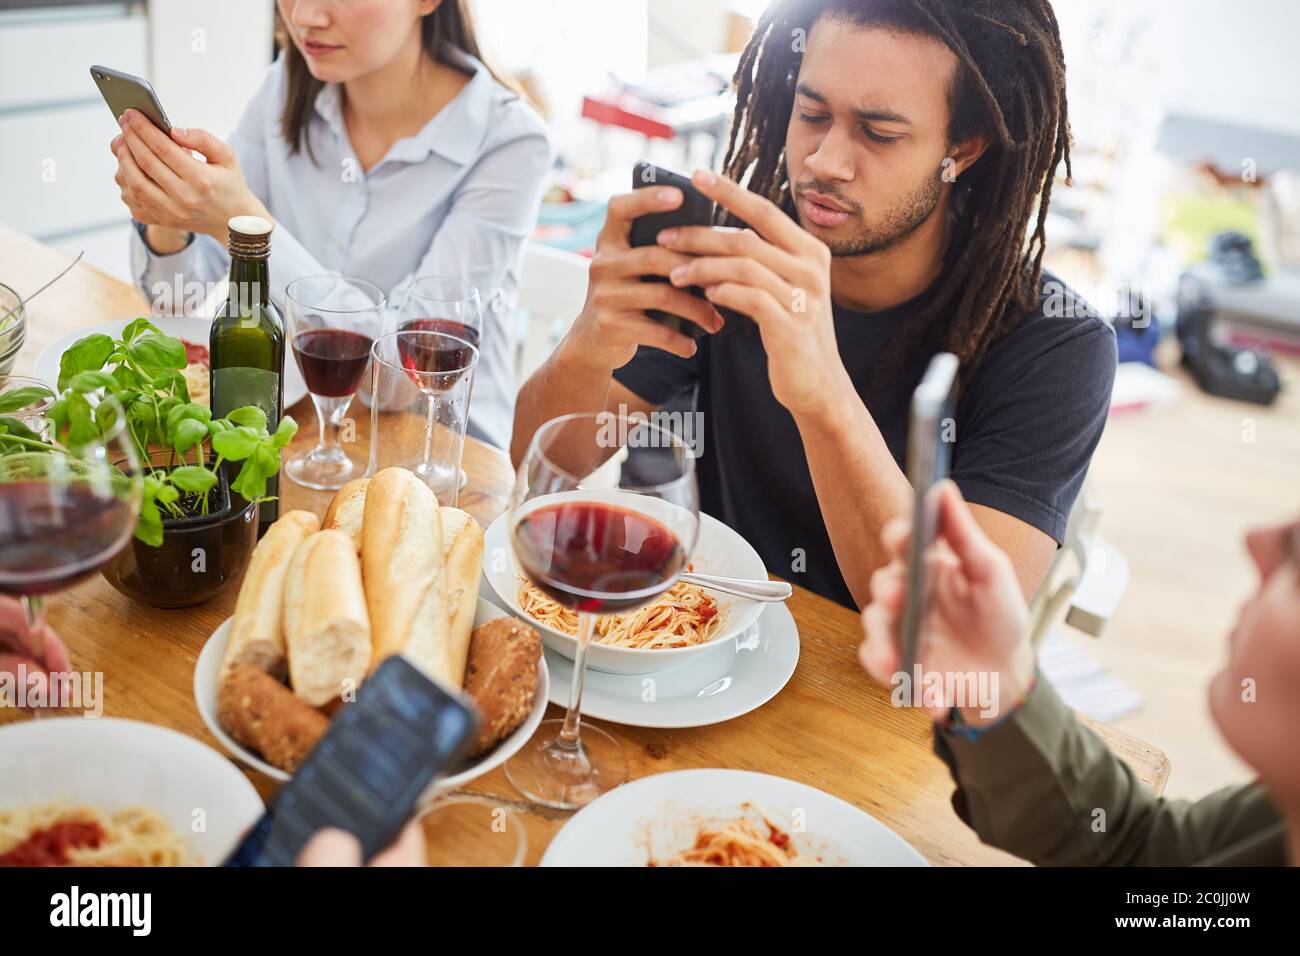 Friends look at social media websites on smartphone while eating at the table Stock Photo